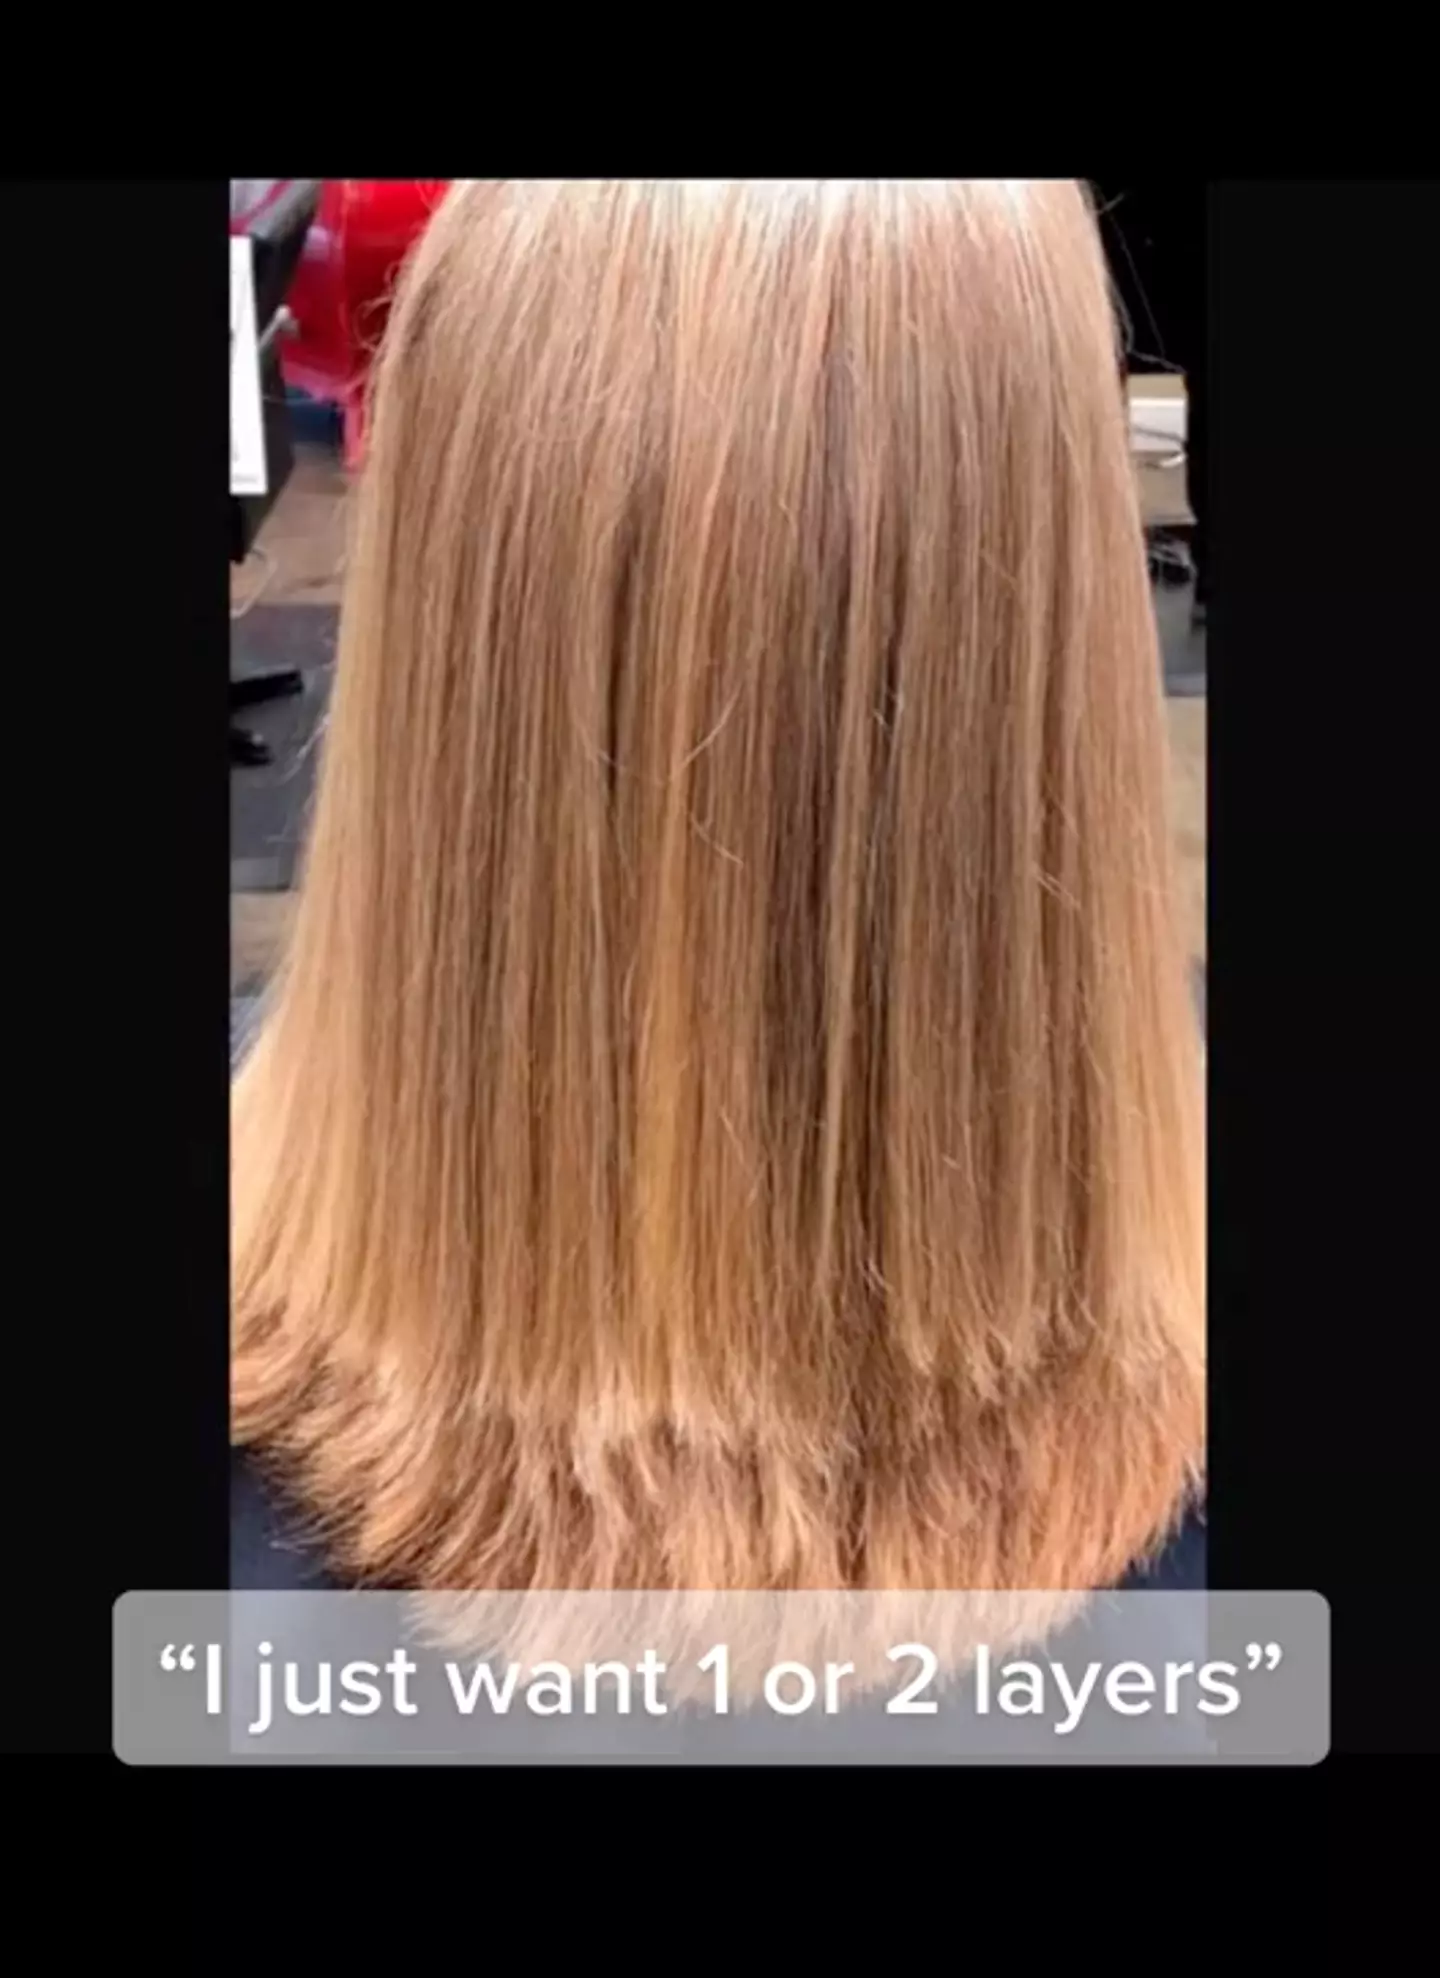 Don't ask your hairdresser for one or two layers, or else.